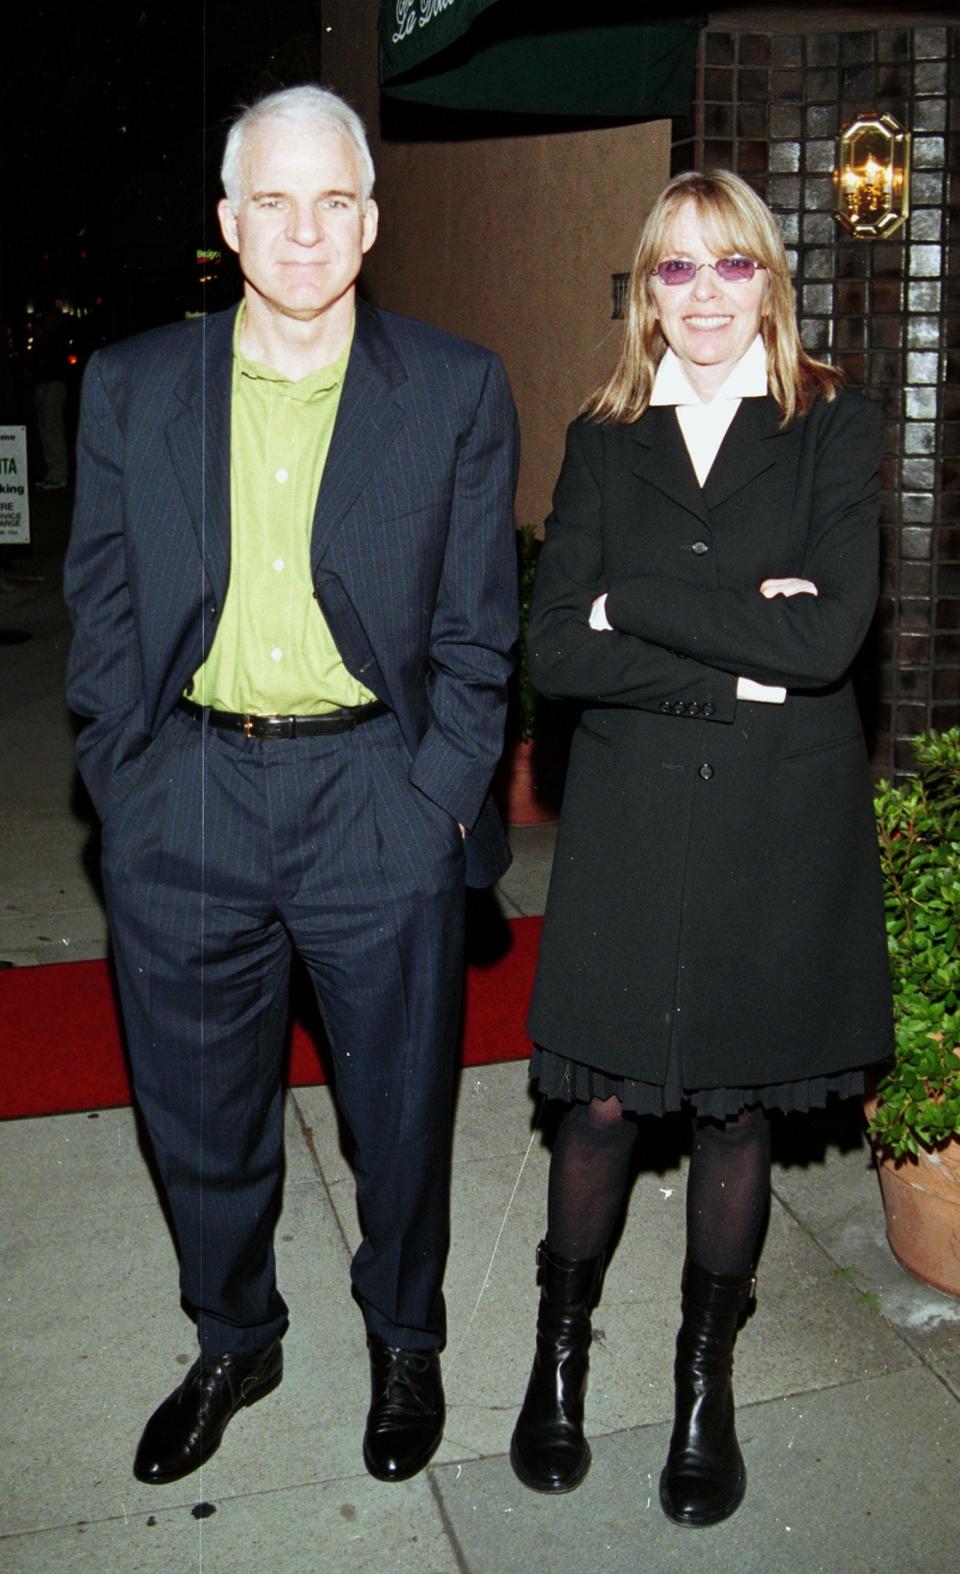 Steve Martin and a female companion stand together; he wears a suit and she's in a coat and knee-high boots